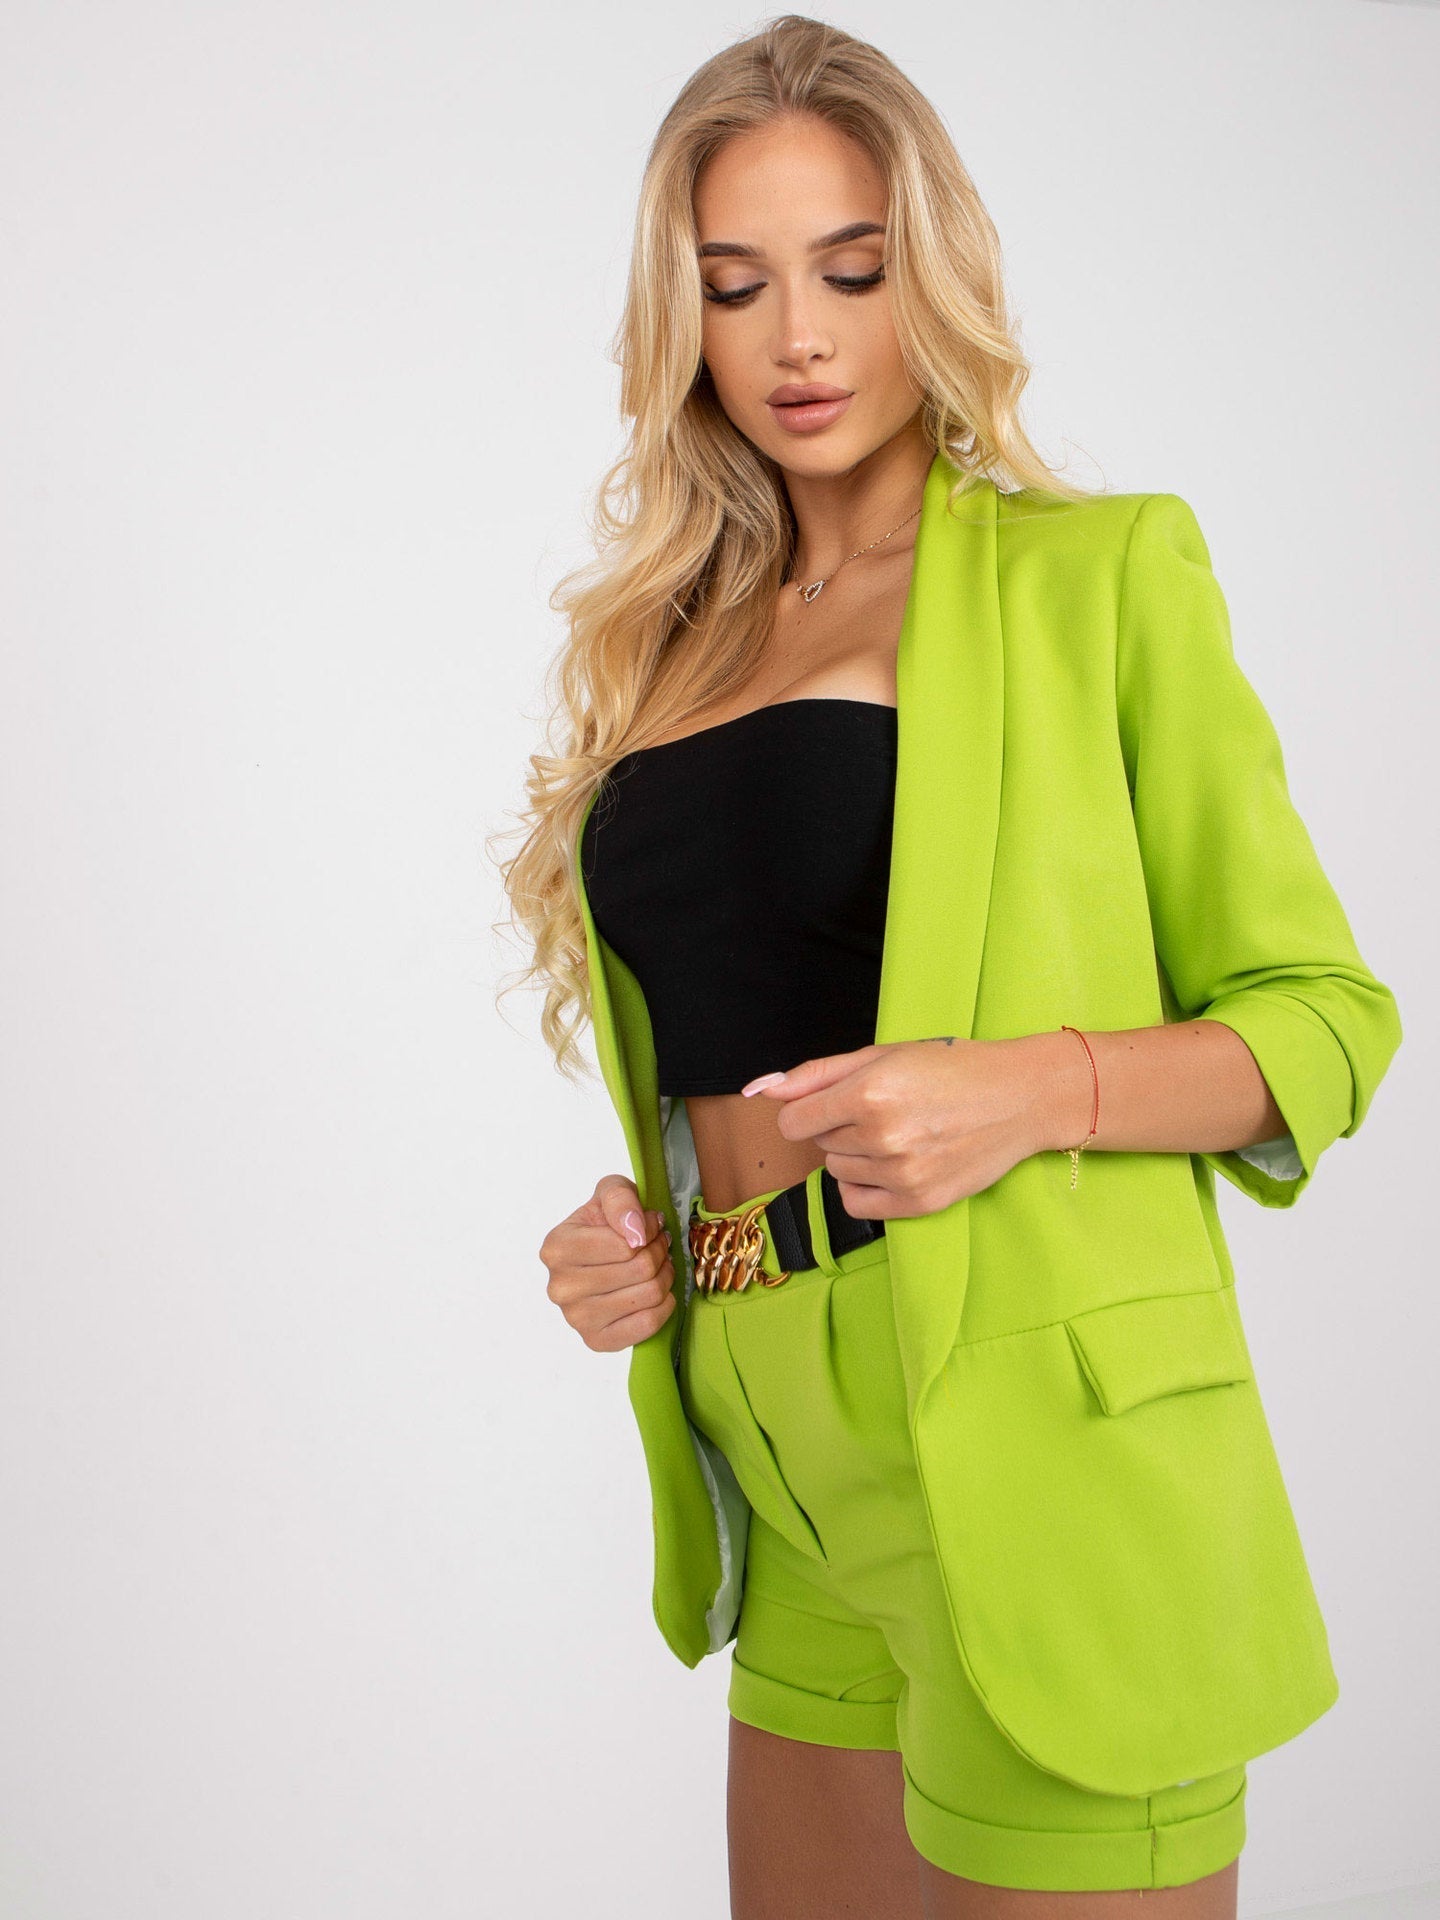 Women Clothing Suit Casual Polo Collar Solid Color Suit Shorts Two-Piece Set Belt Not Included